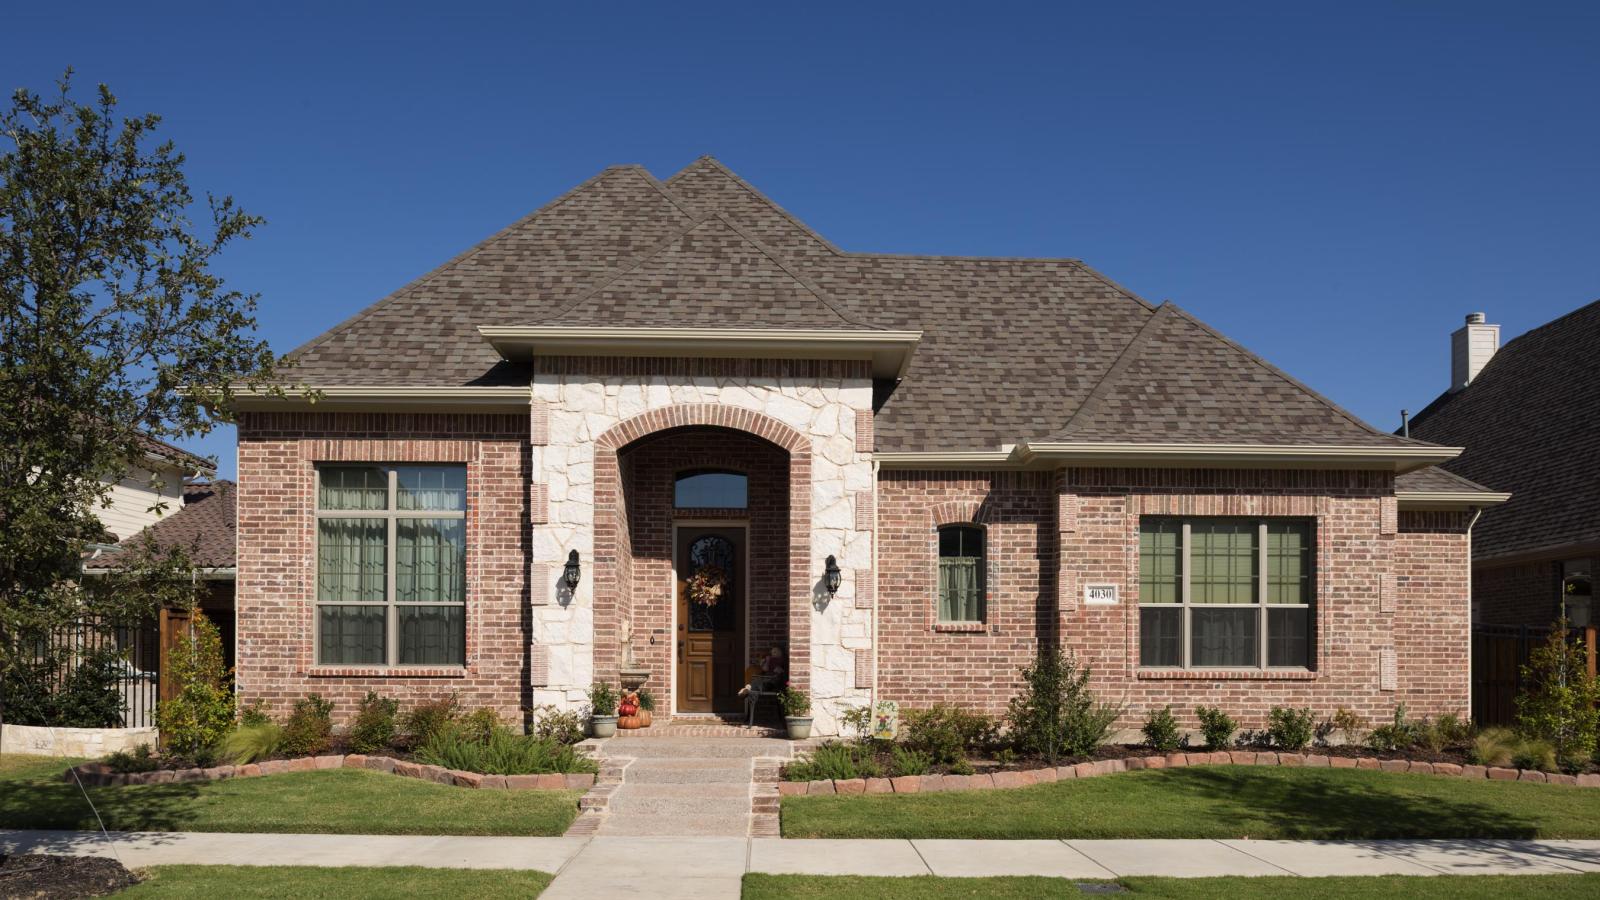 4 Ways a Brick Home Can Make You $10,000 Richer Every Year